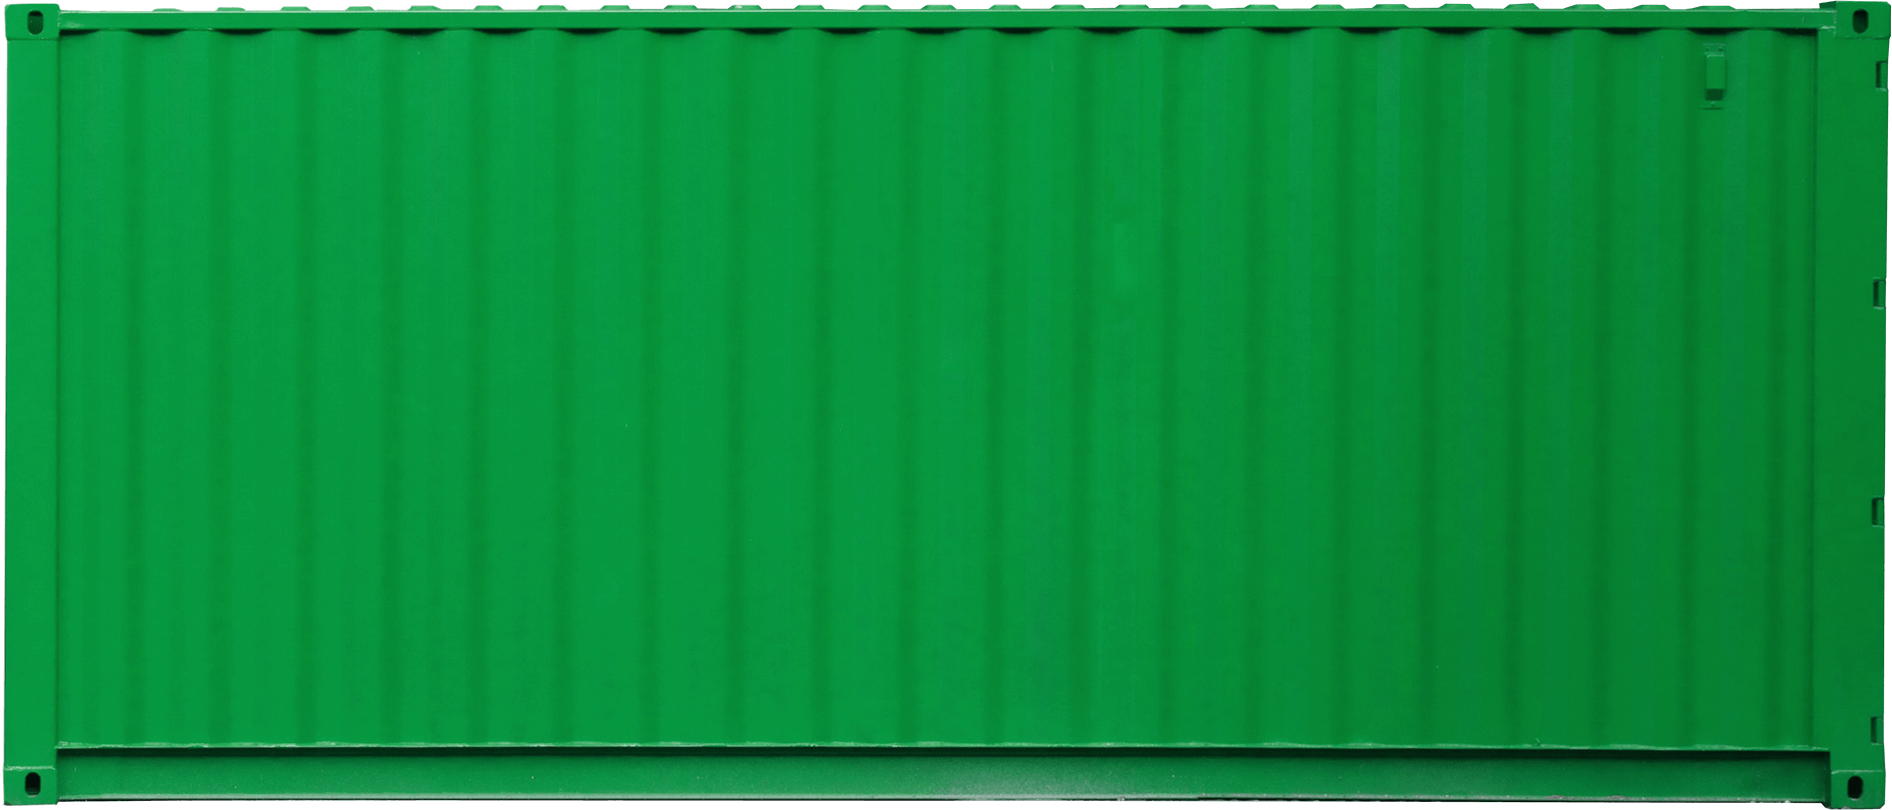 Freight forwarding - Green shipping container